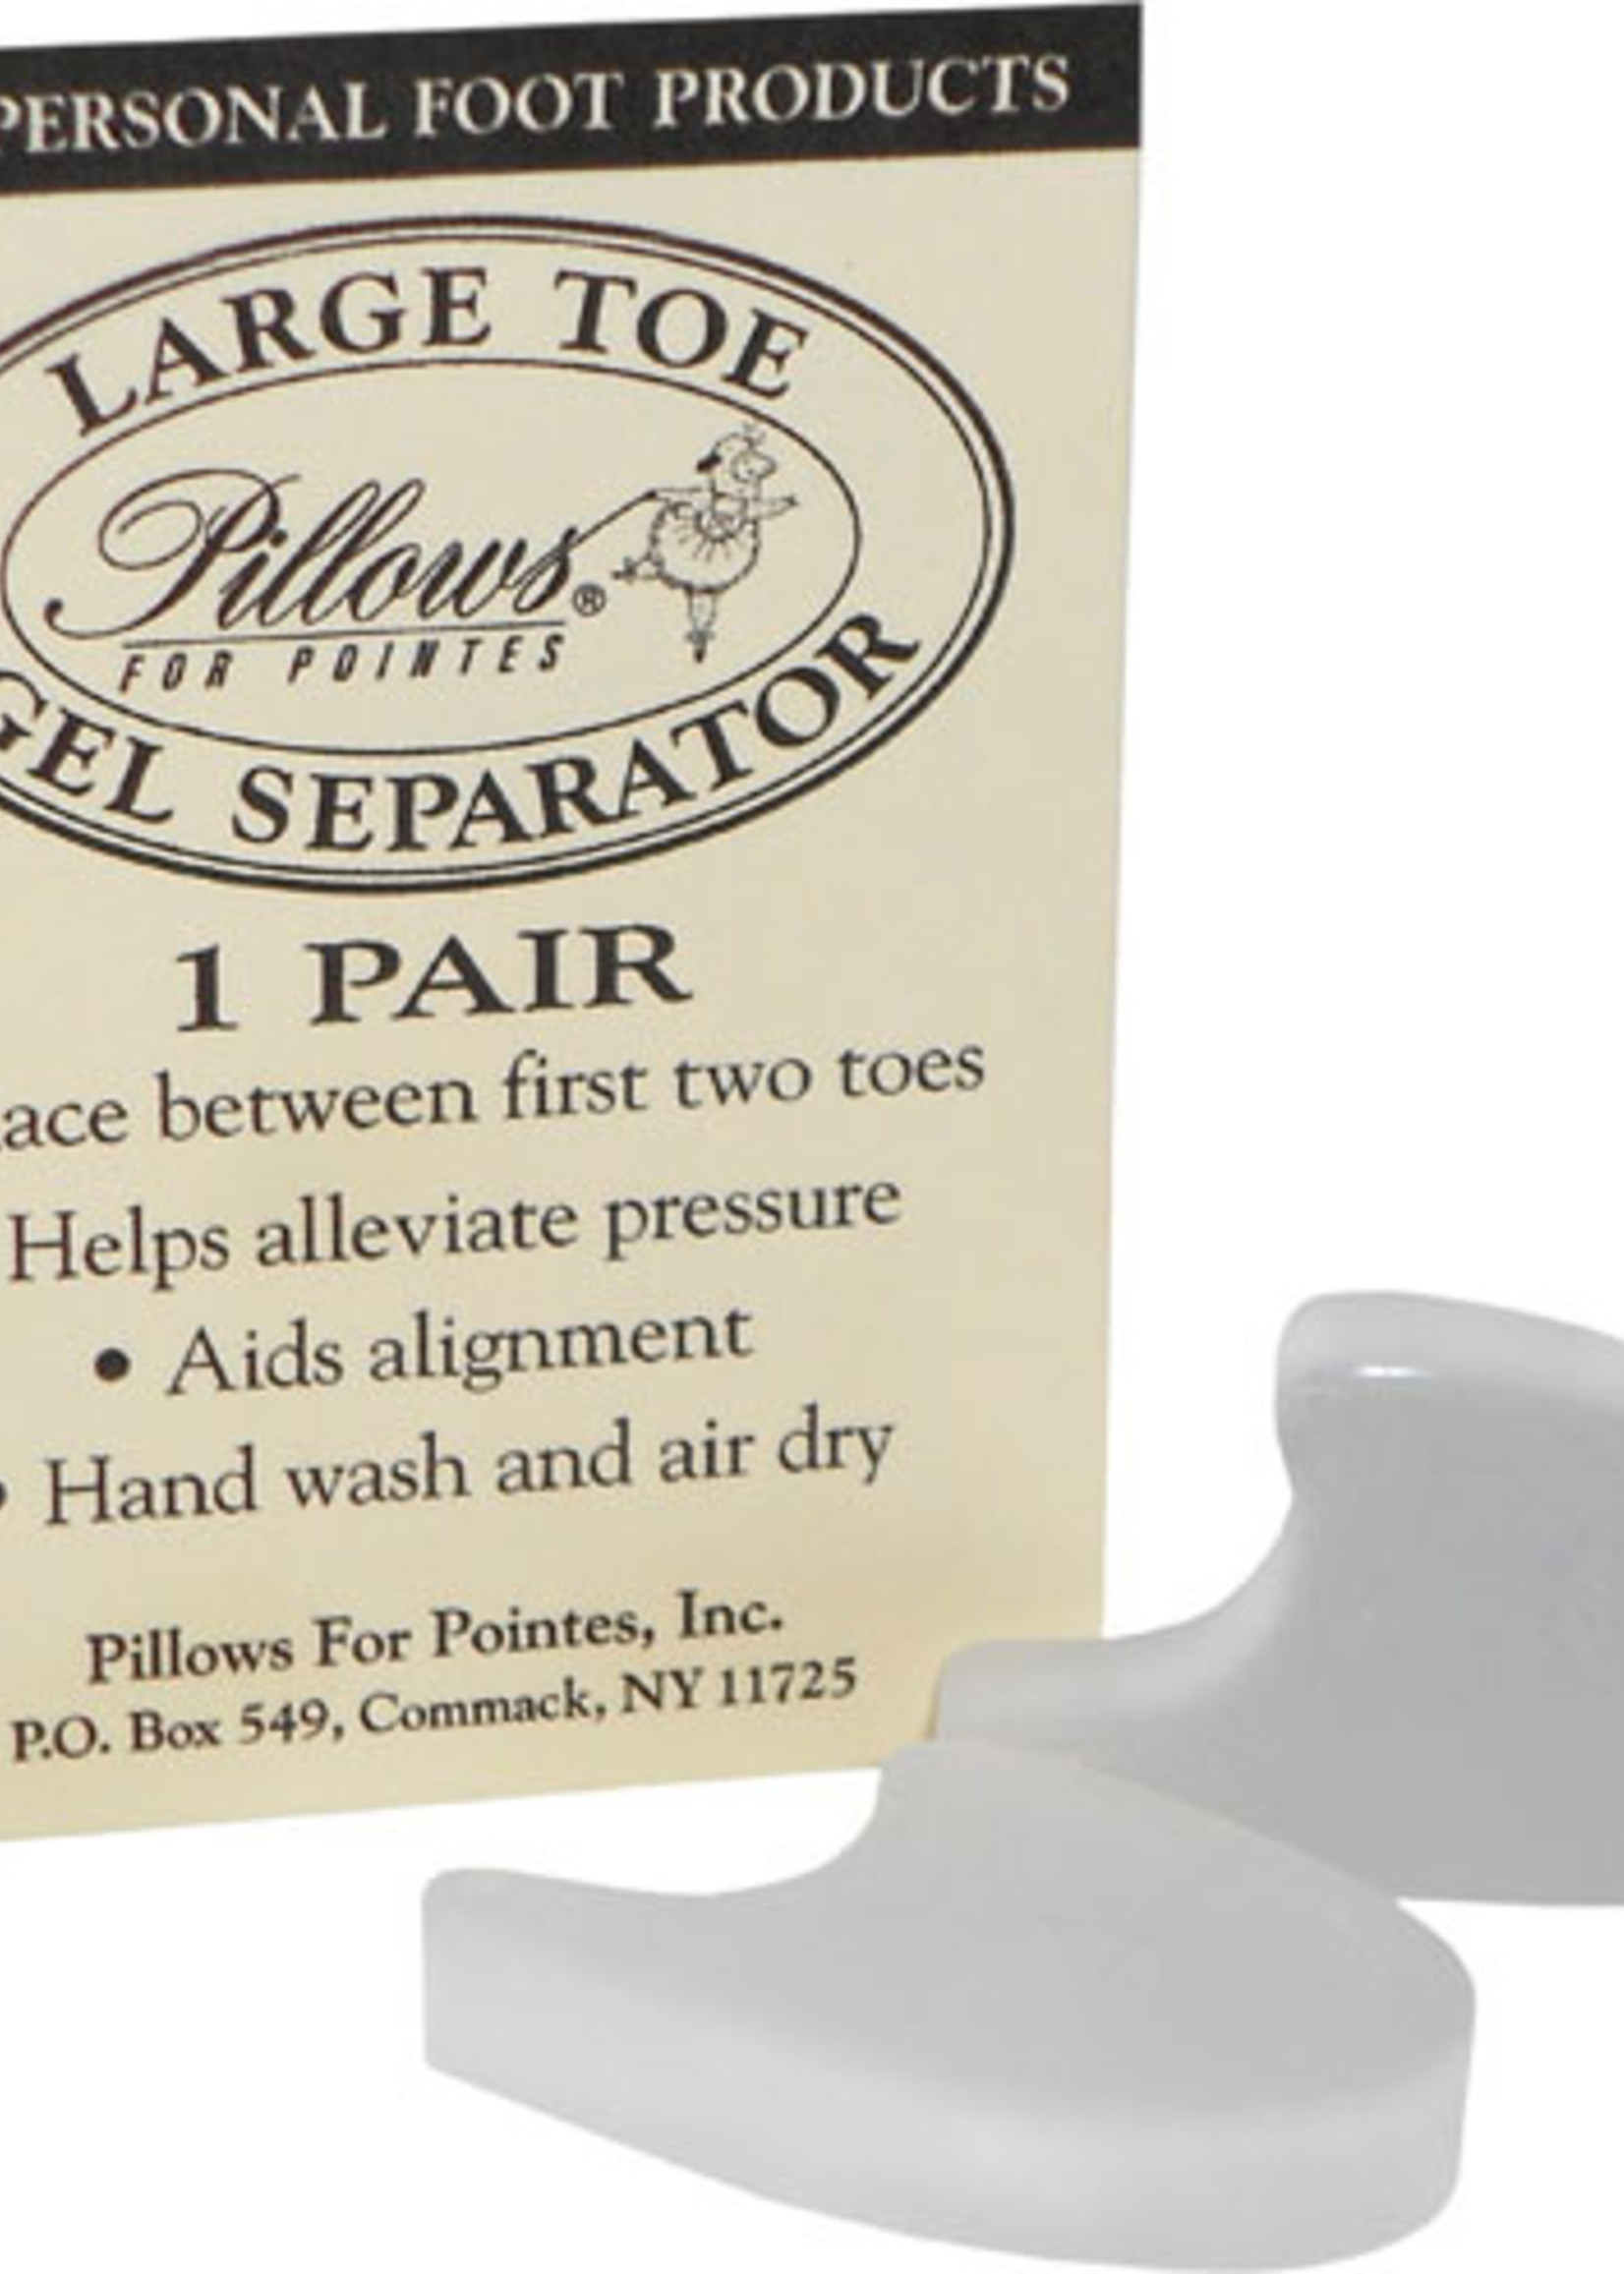 Pillows for Pointes Large Toe Gel Separators